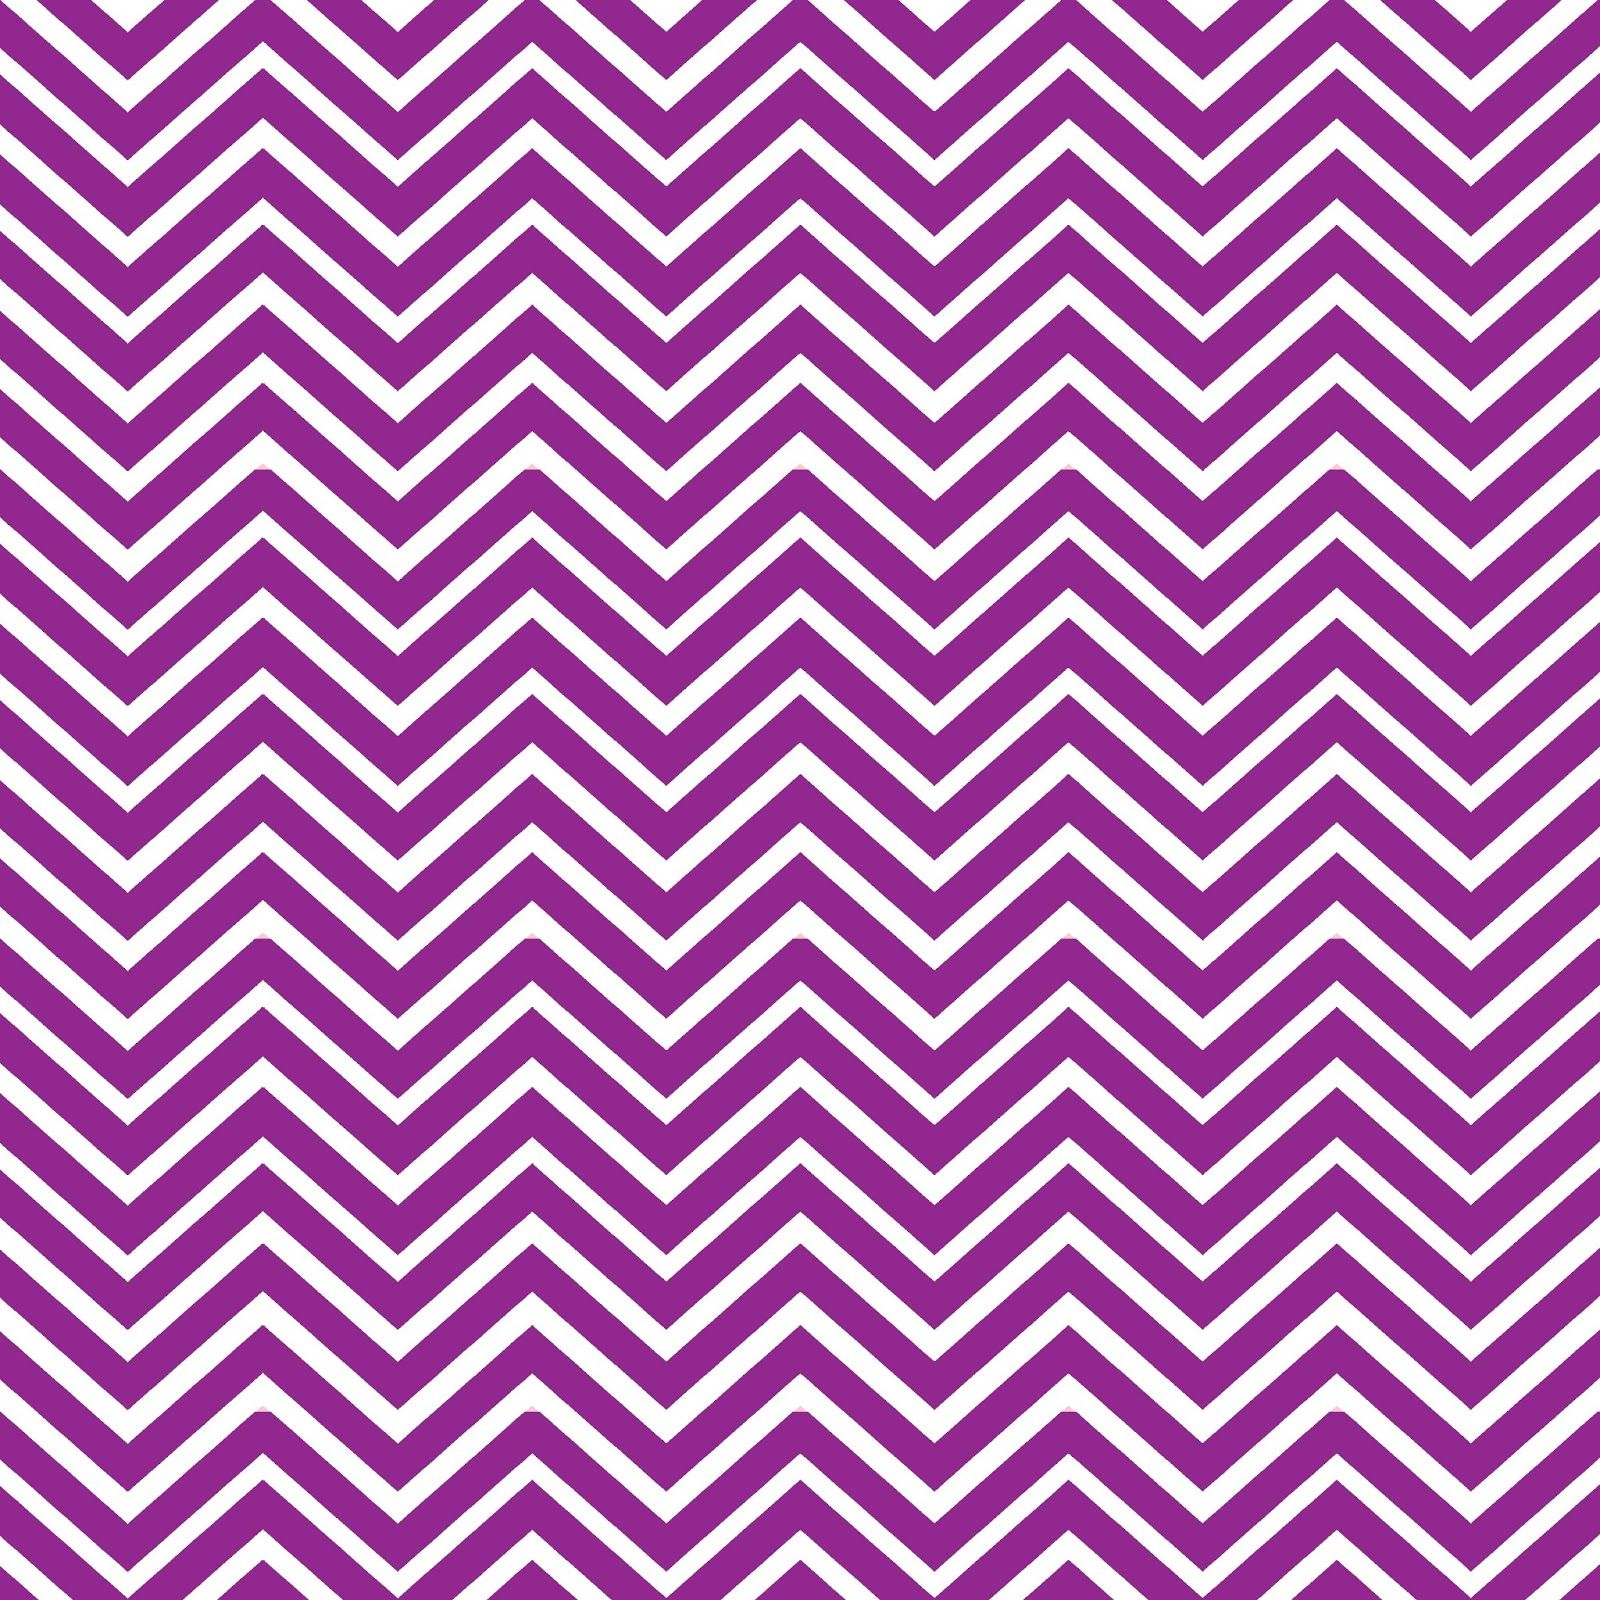 Free Download Or Printable Chevron - 10 Different Colors - Purple - Chevron Pattern Printable Free